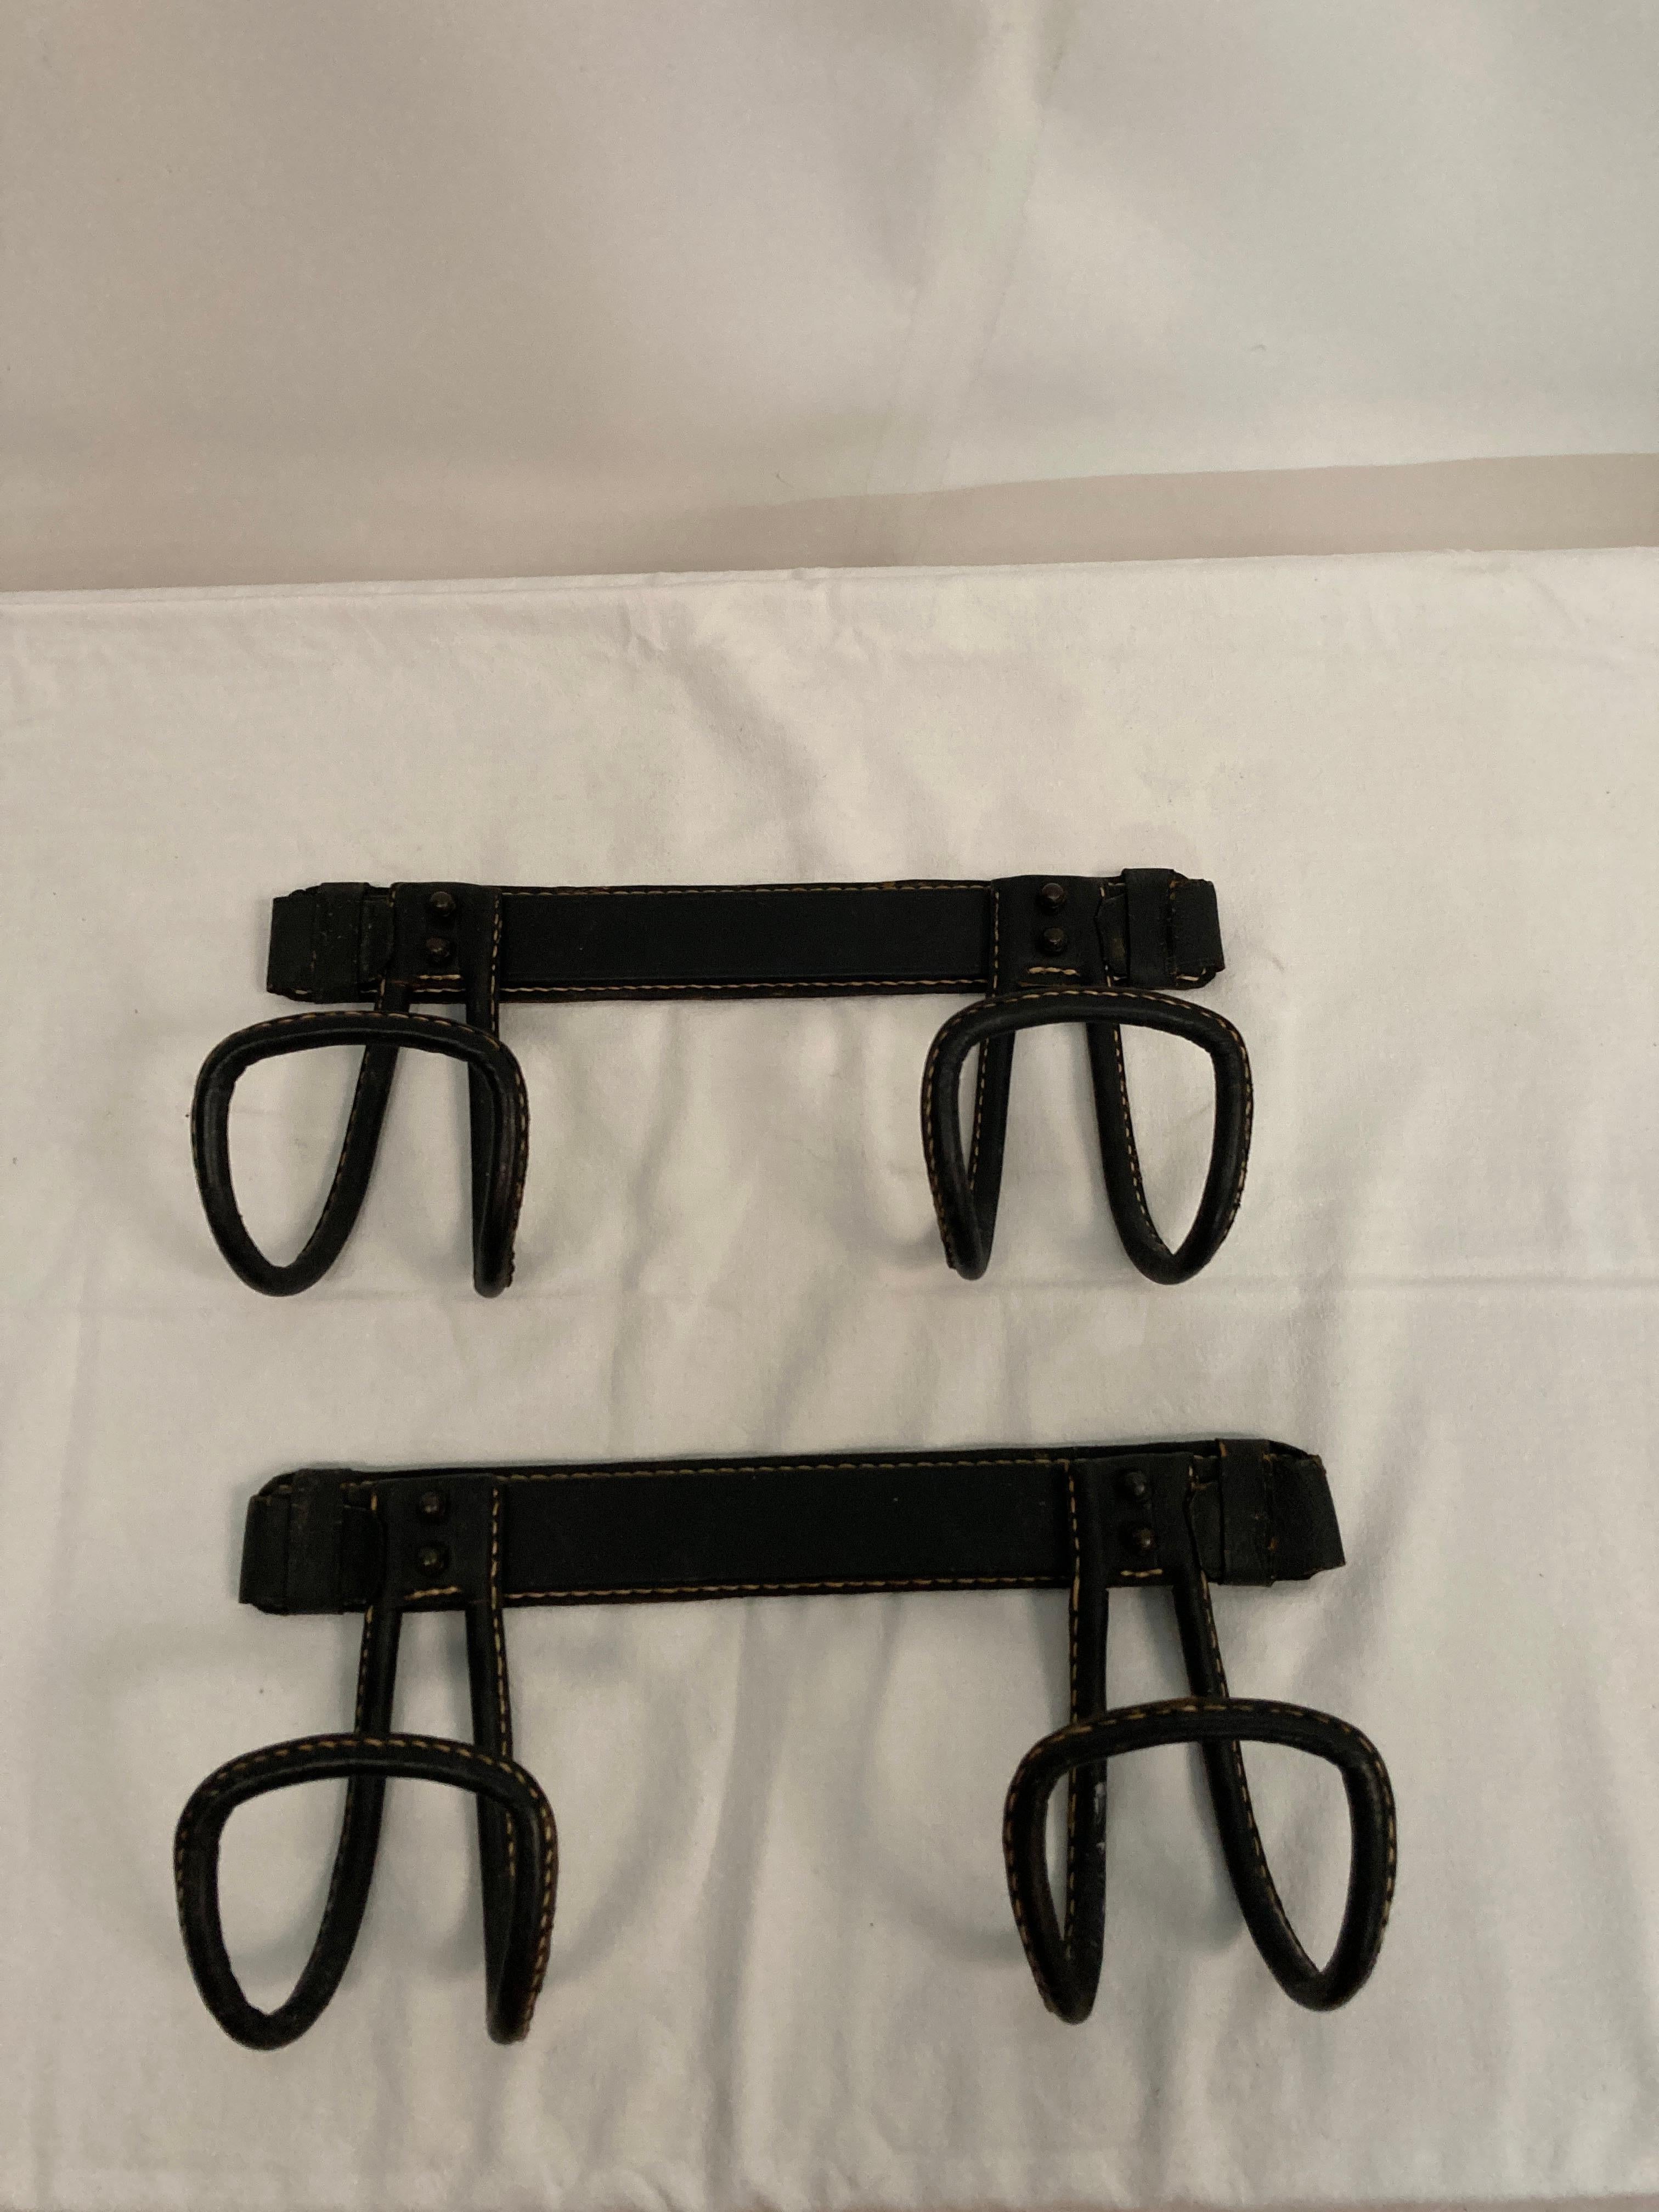 1950's Stitched leather coat racks by Jacques Adnet
Sold as a pair